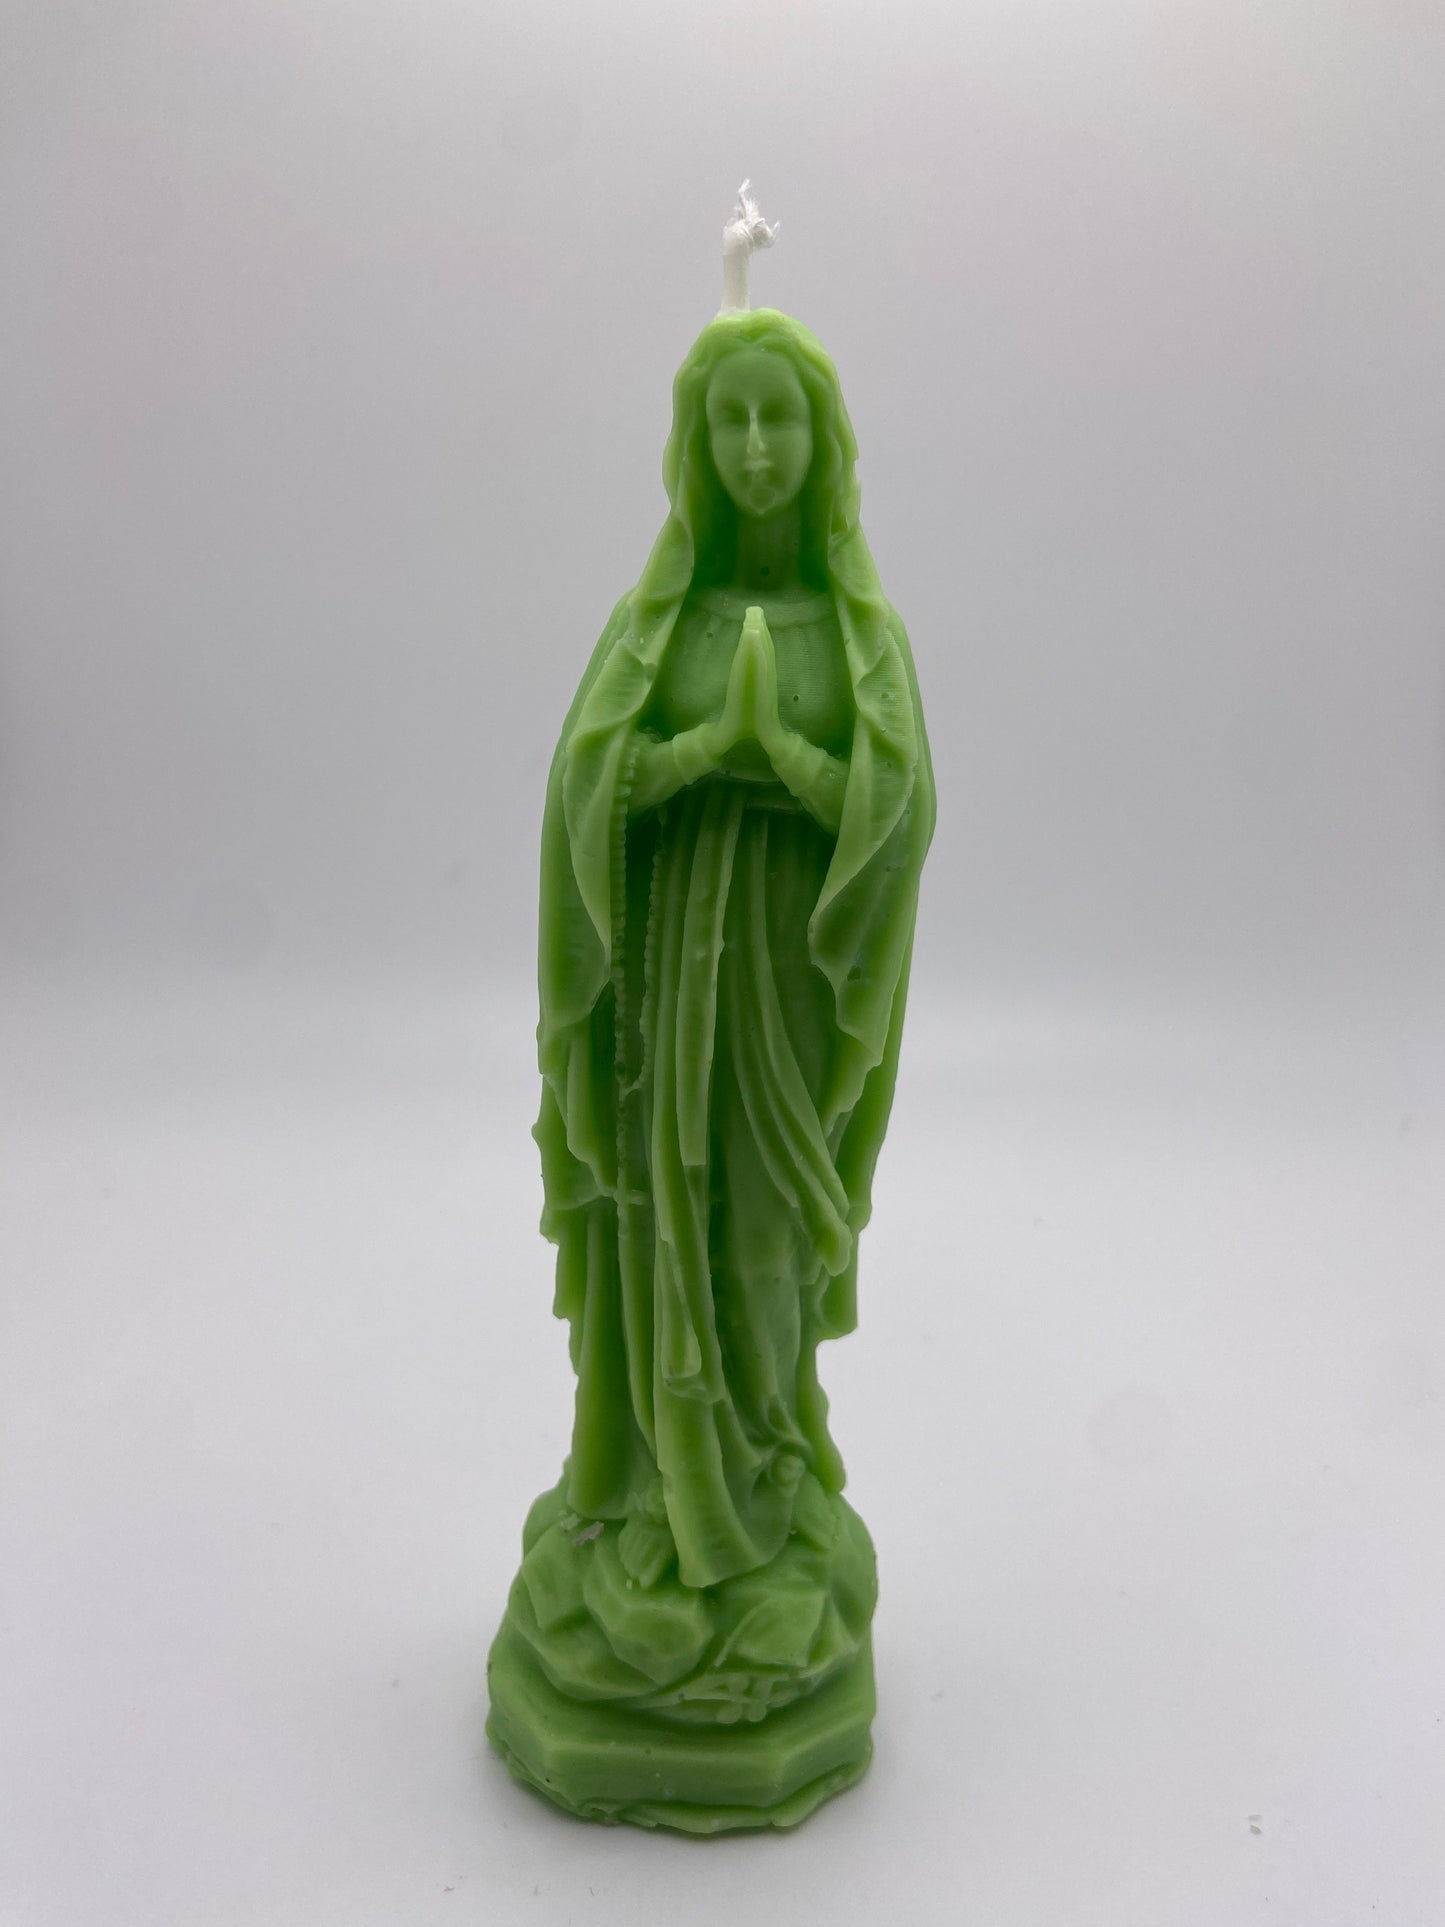 Holy Mary Candle